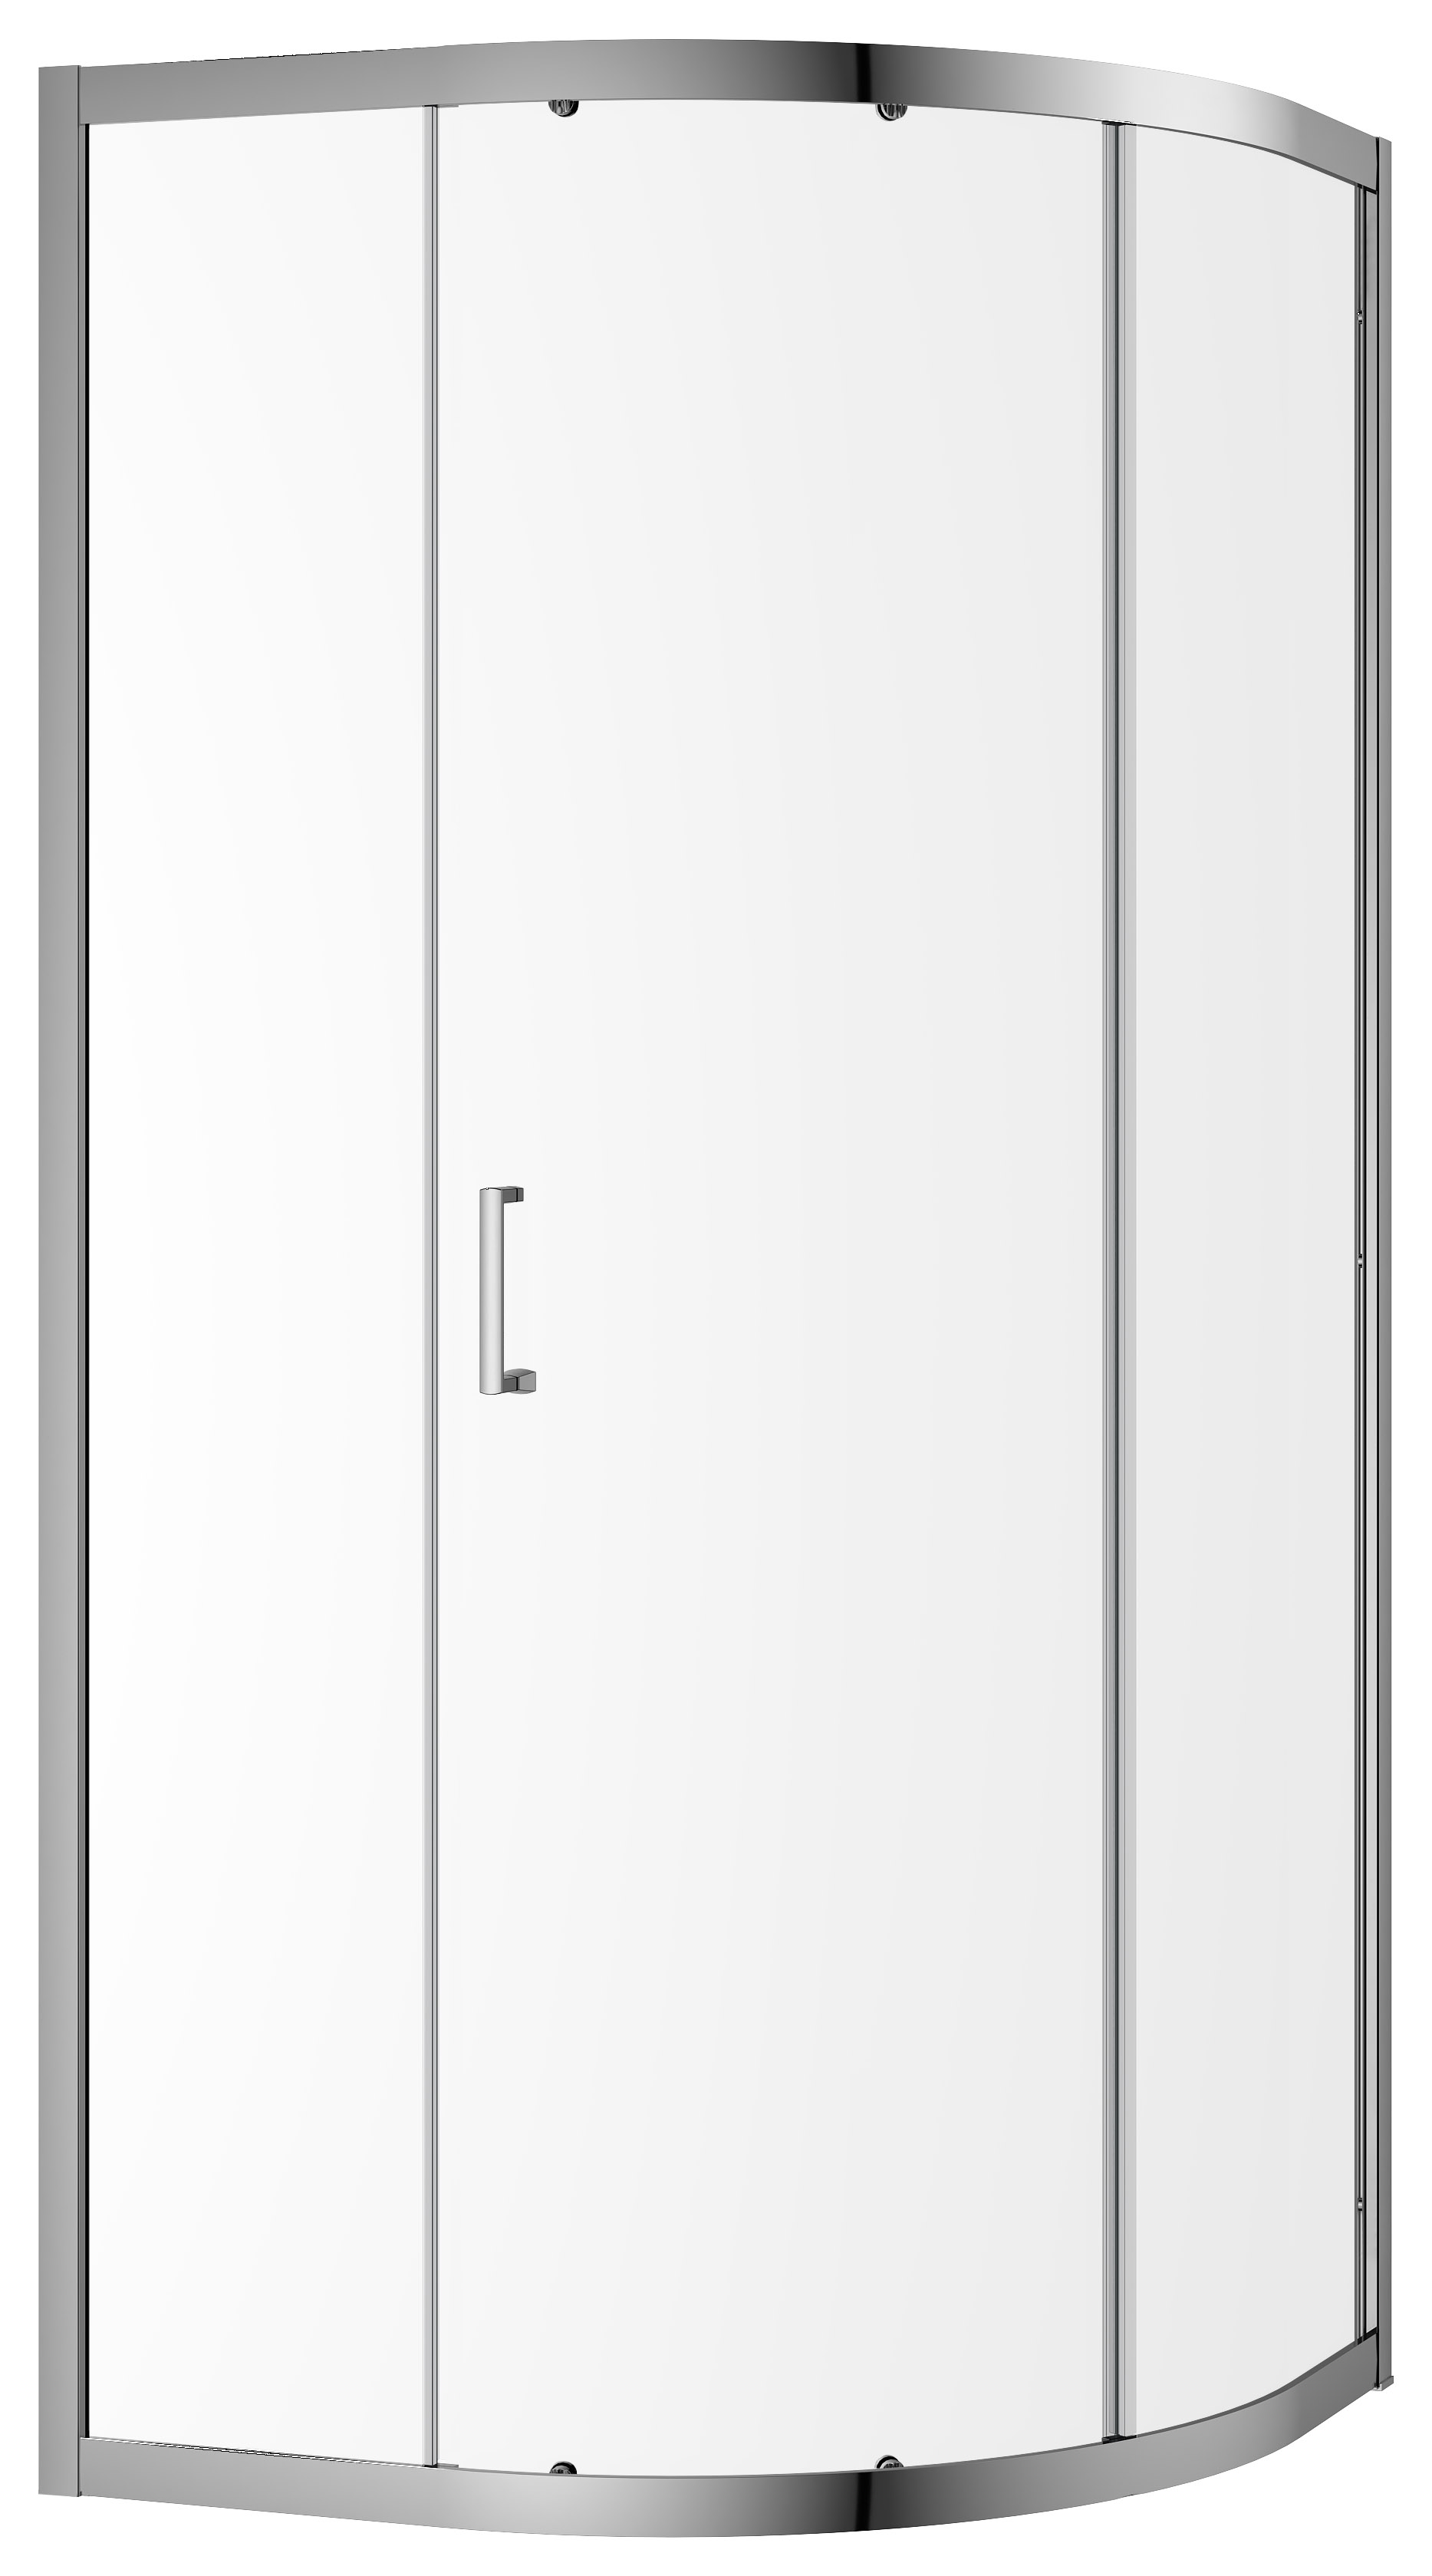 Nexa By Merlyn 6mm Right Hand Framed Chrome Offset Quadrant Double Door Shower Enclosure Only - 900 x 760mm - Includes Tray